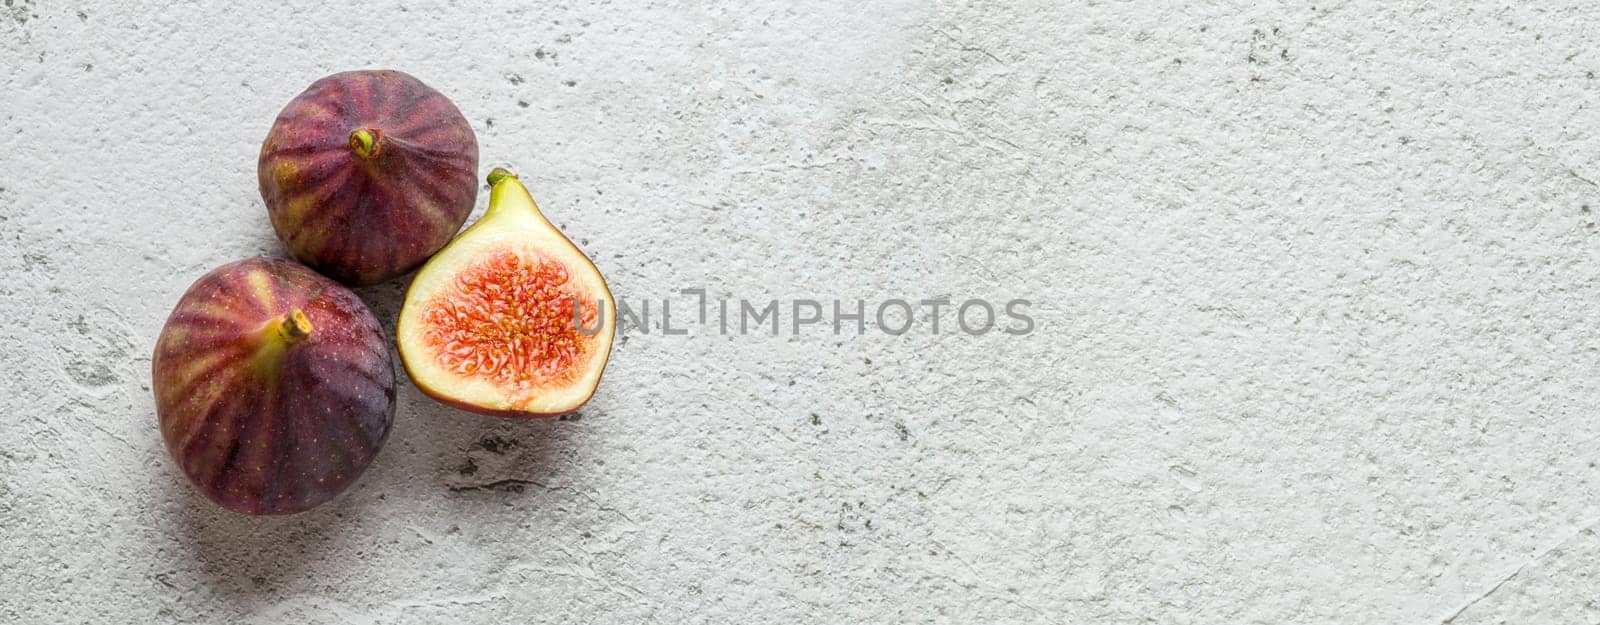 View of whole and cut organic figs on stone table